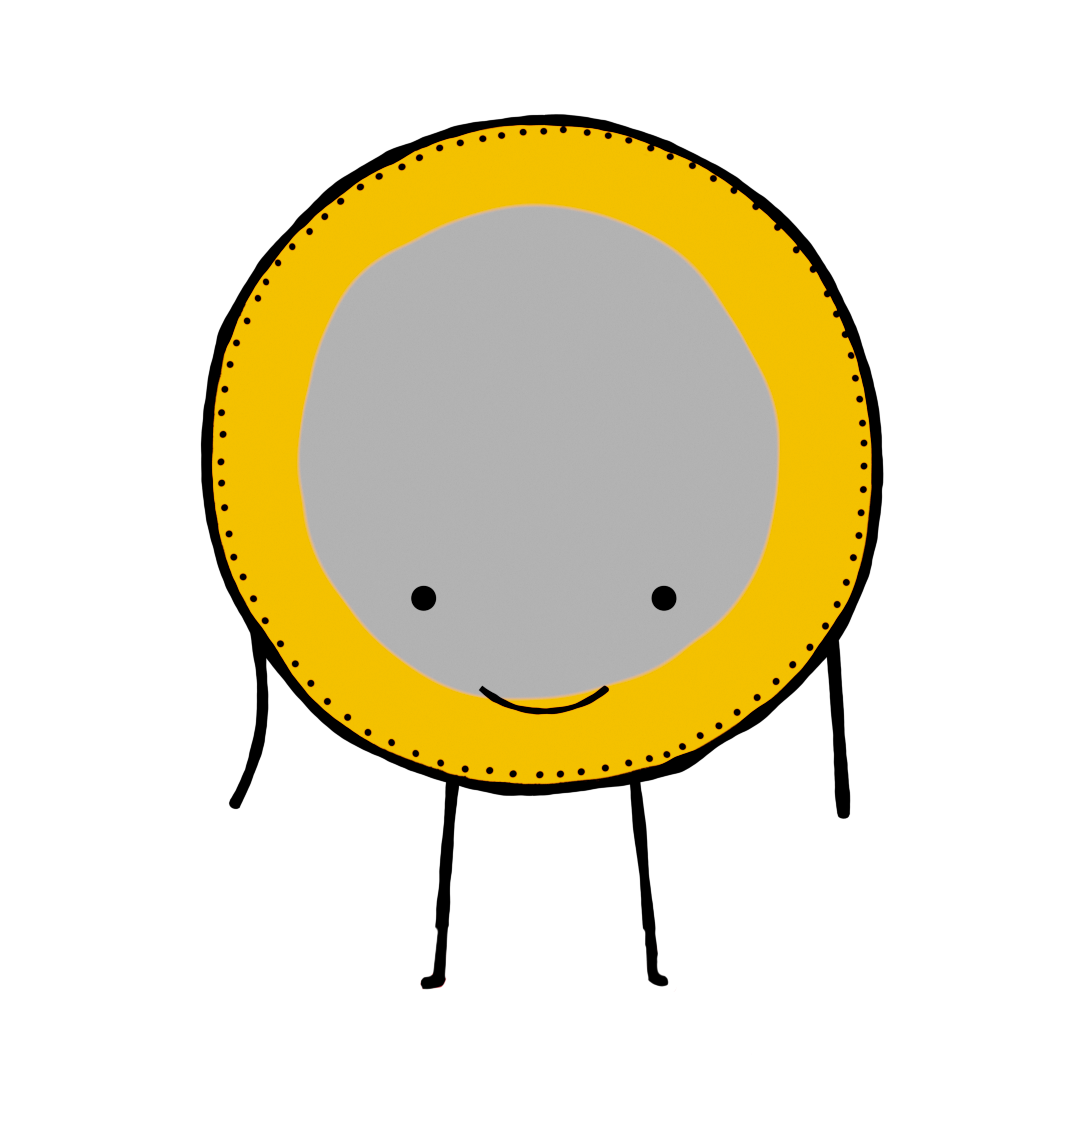 Small coin with a smily face